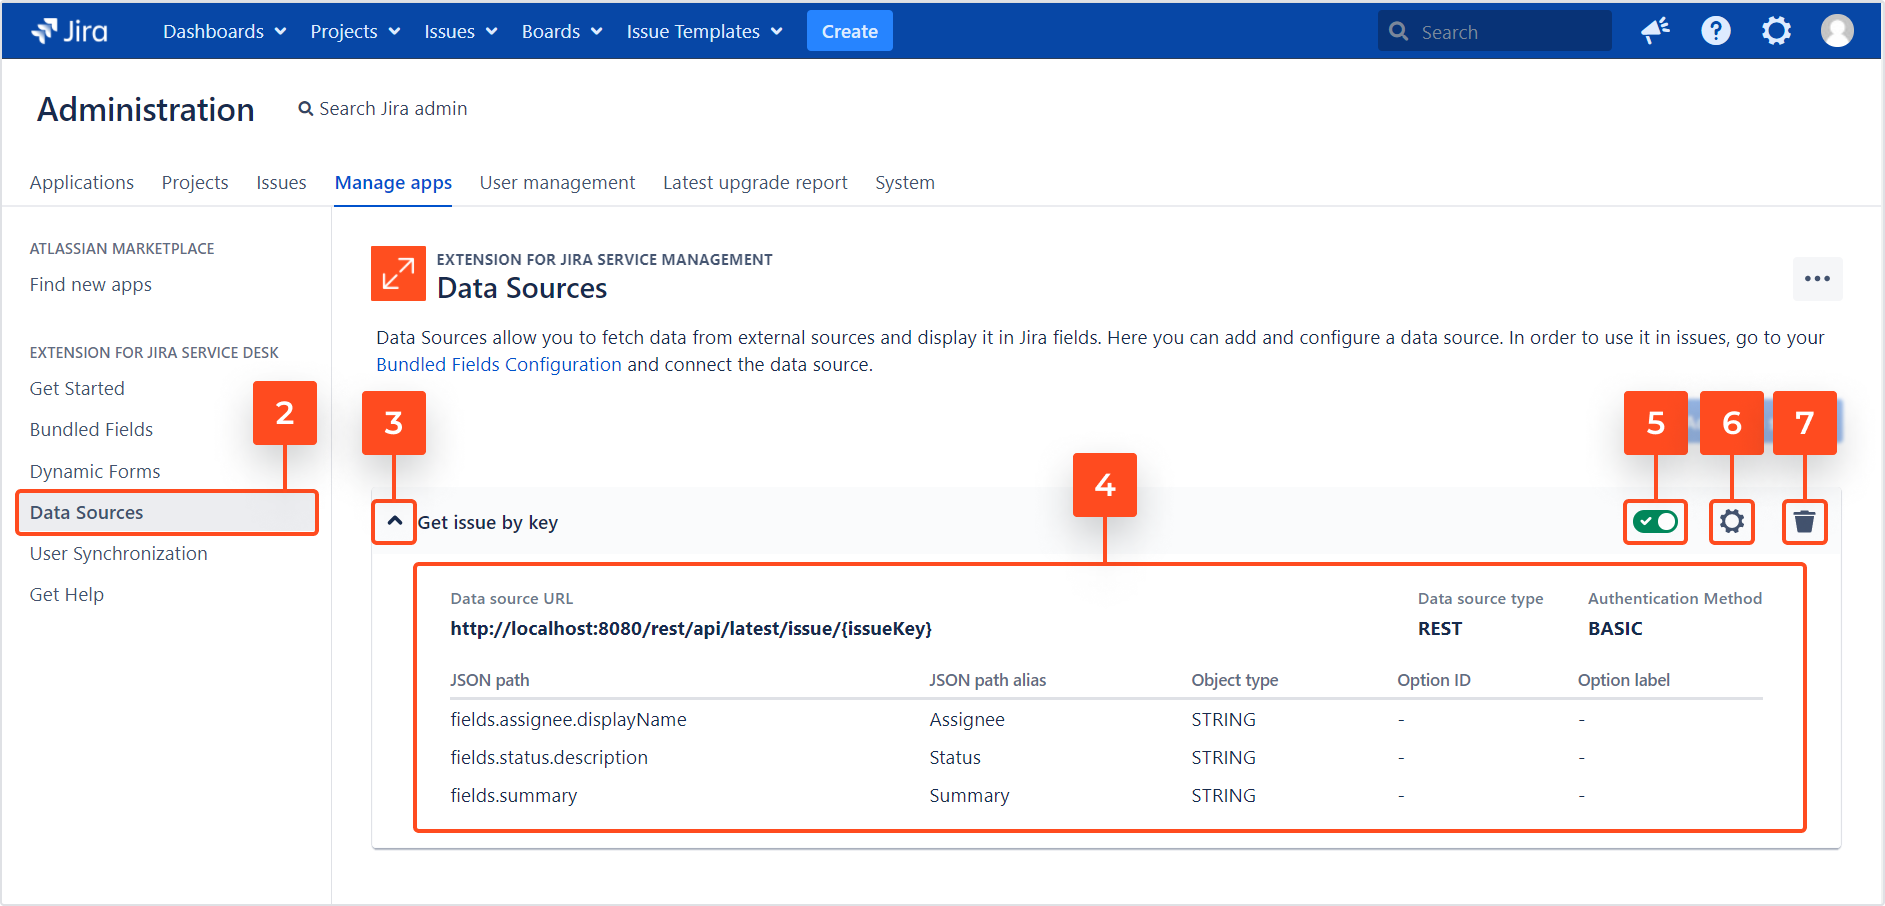 Extension for Jira Service Management - Bundled Fields Data Sources: Updating a data source